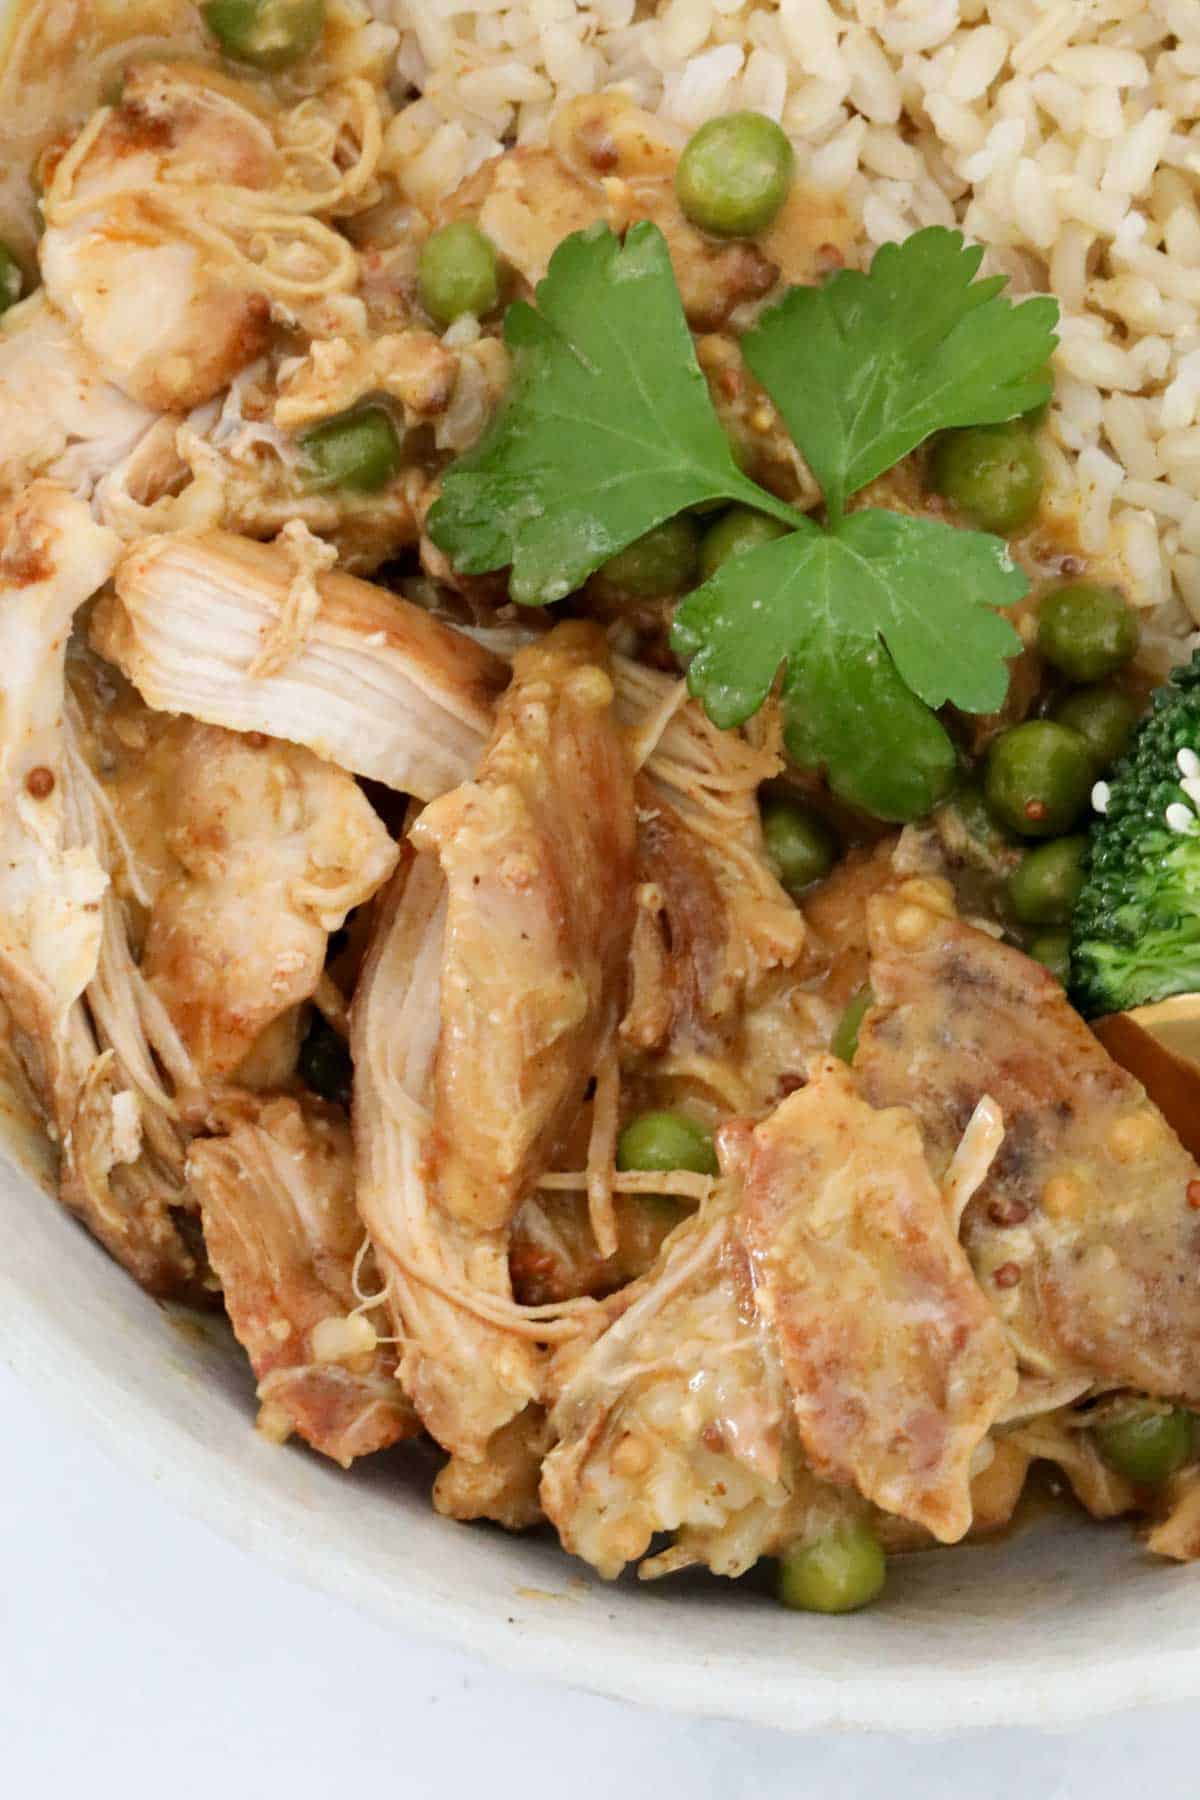 Close up of shredded chicken pieces in a sauce with a little parsley on top.